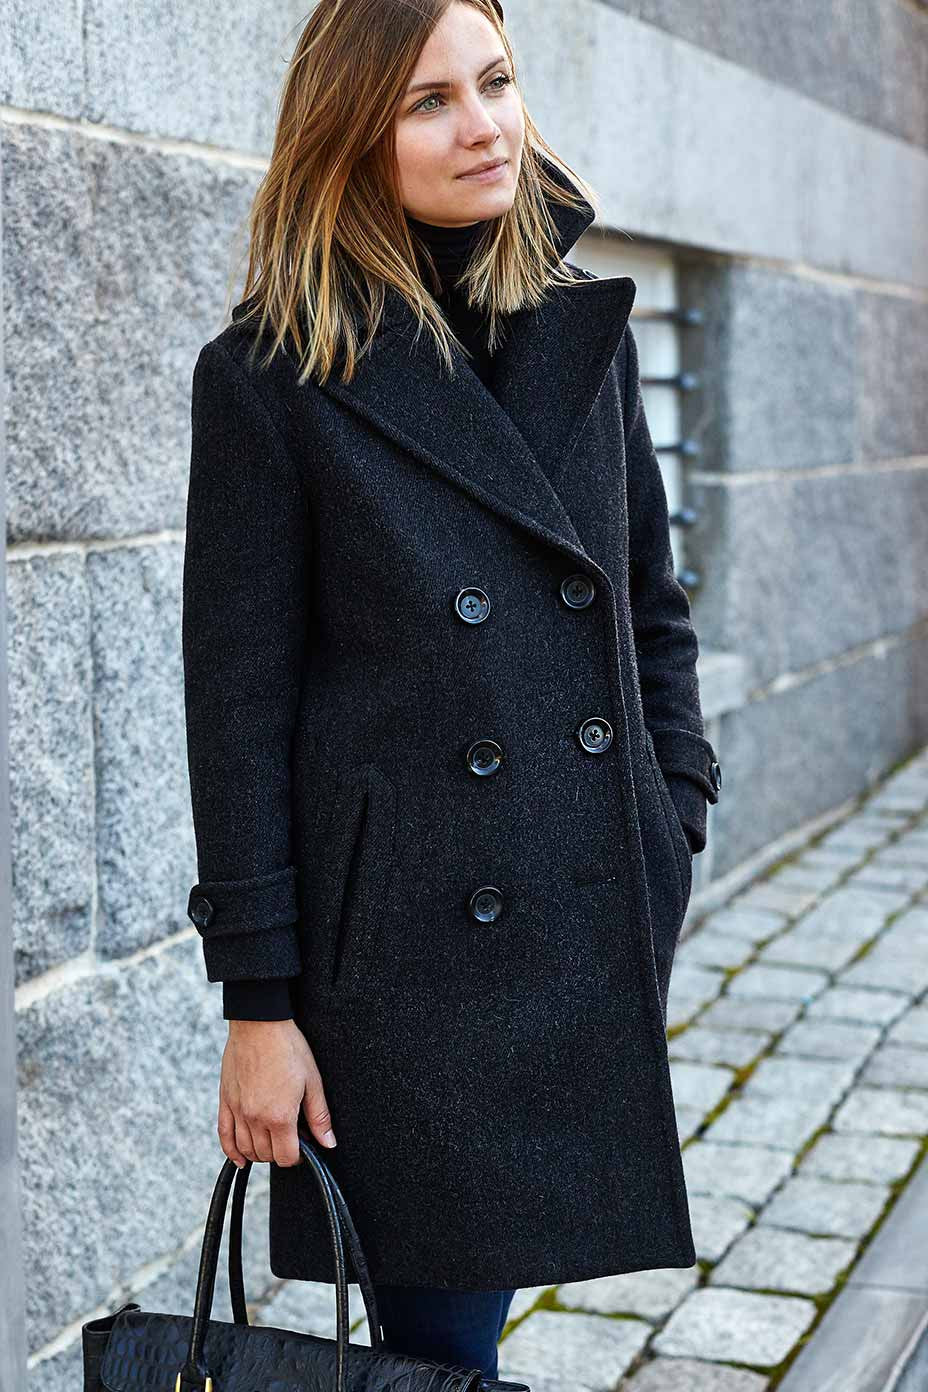 Emerson Peacoat - Charcoal Wool Cashmere